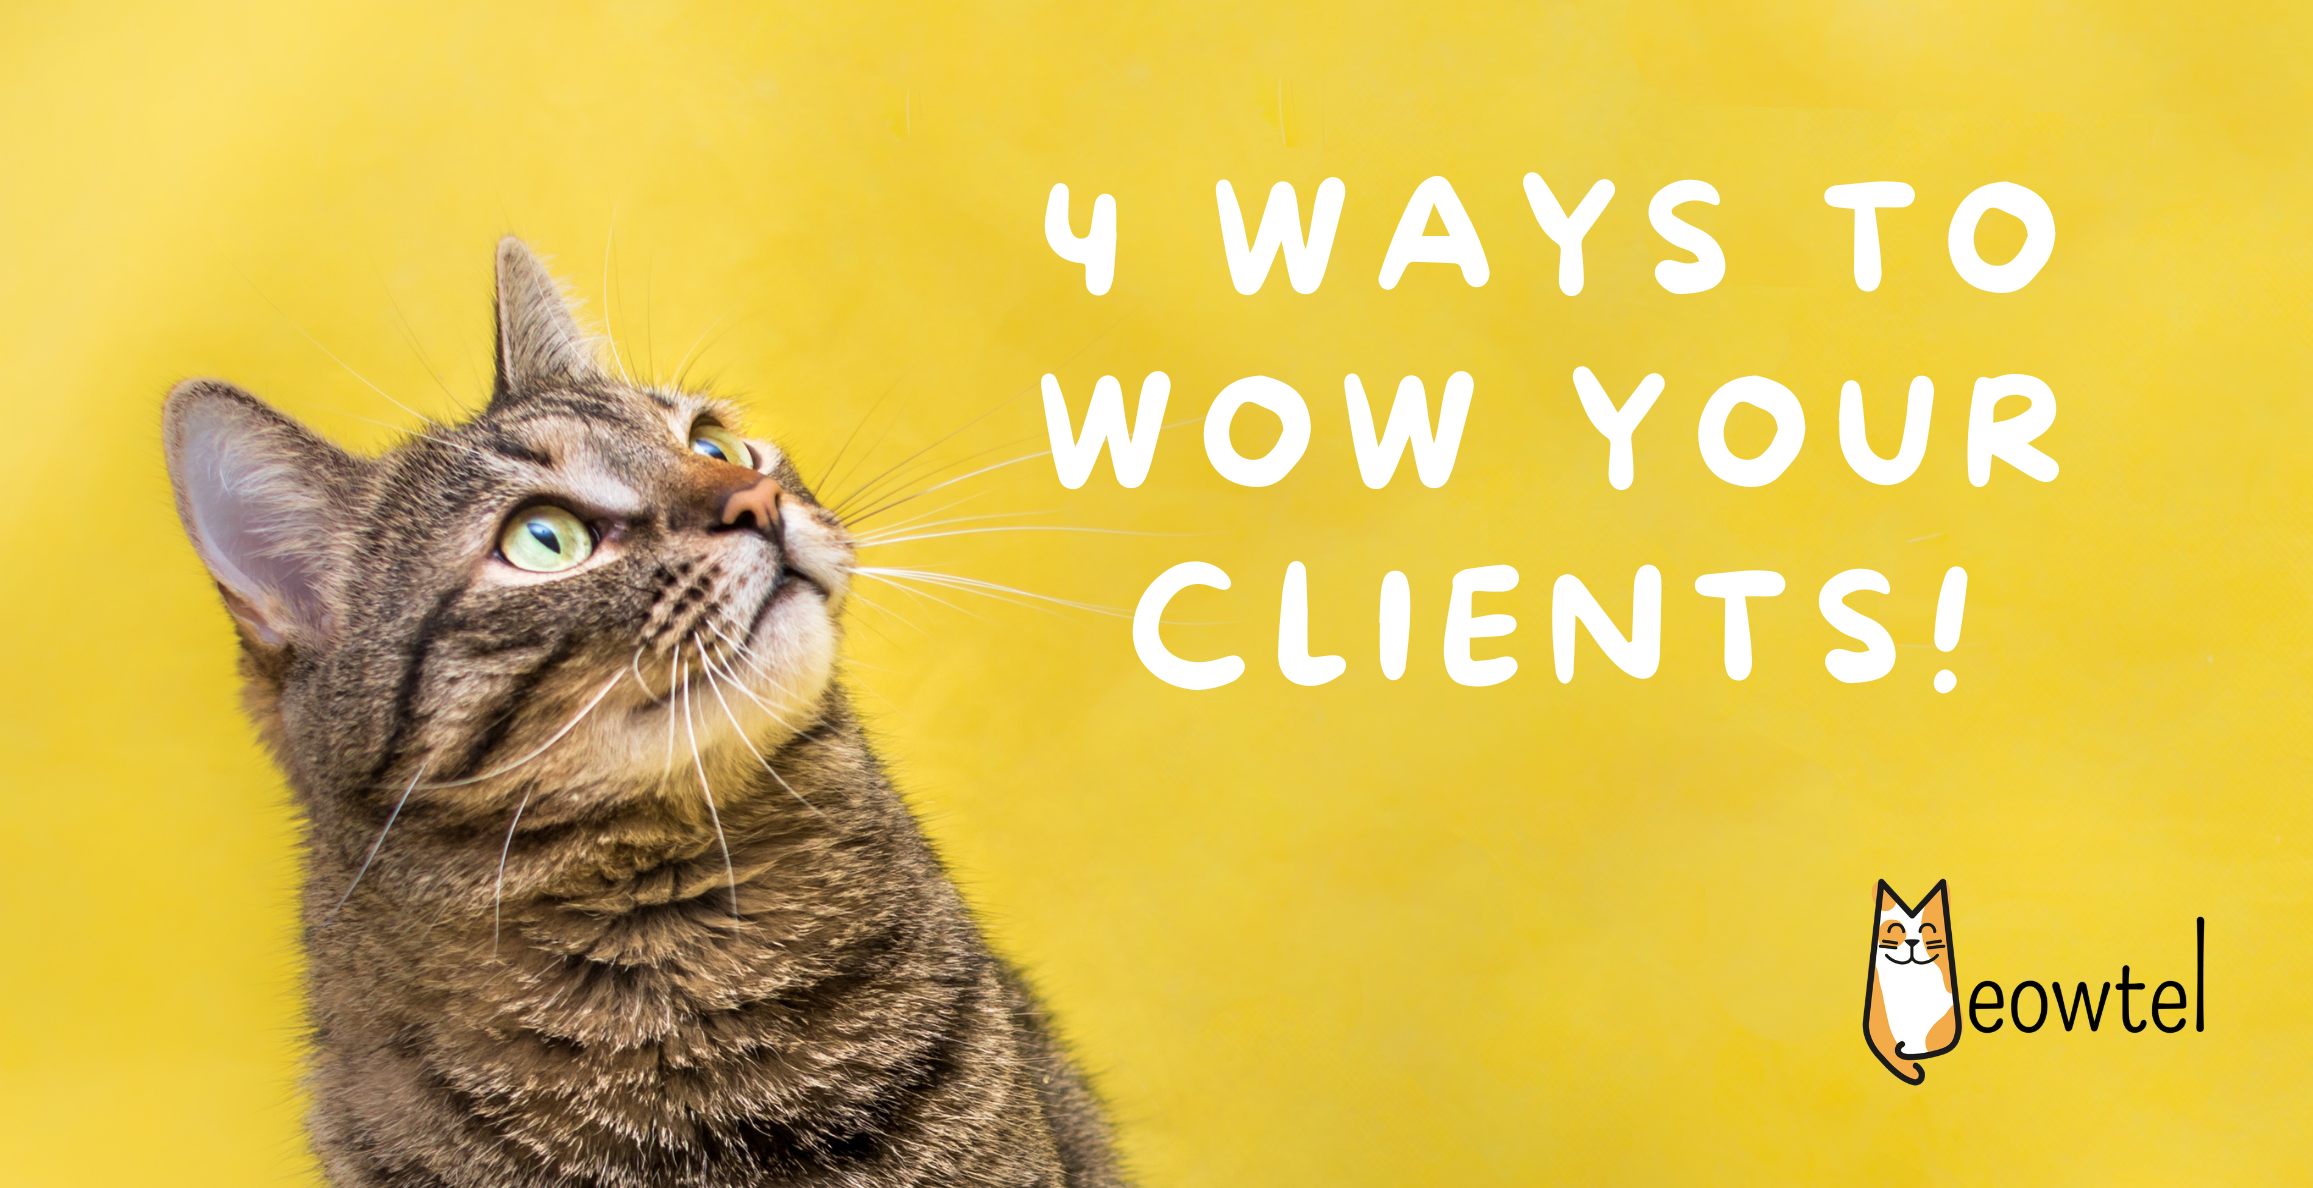 4 Ways to Wow Your Clients: How To Meet and Exceed Client Expectations